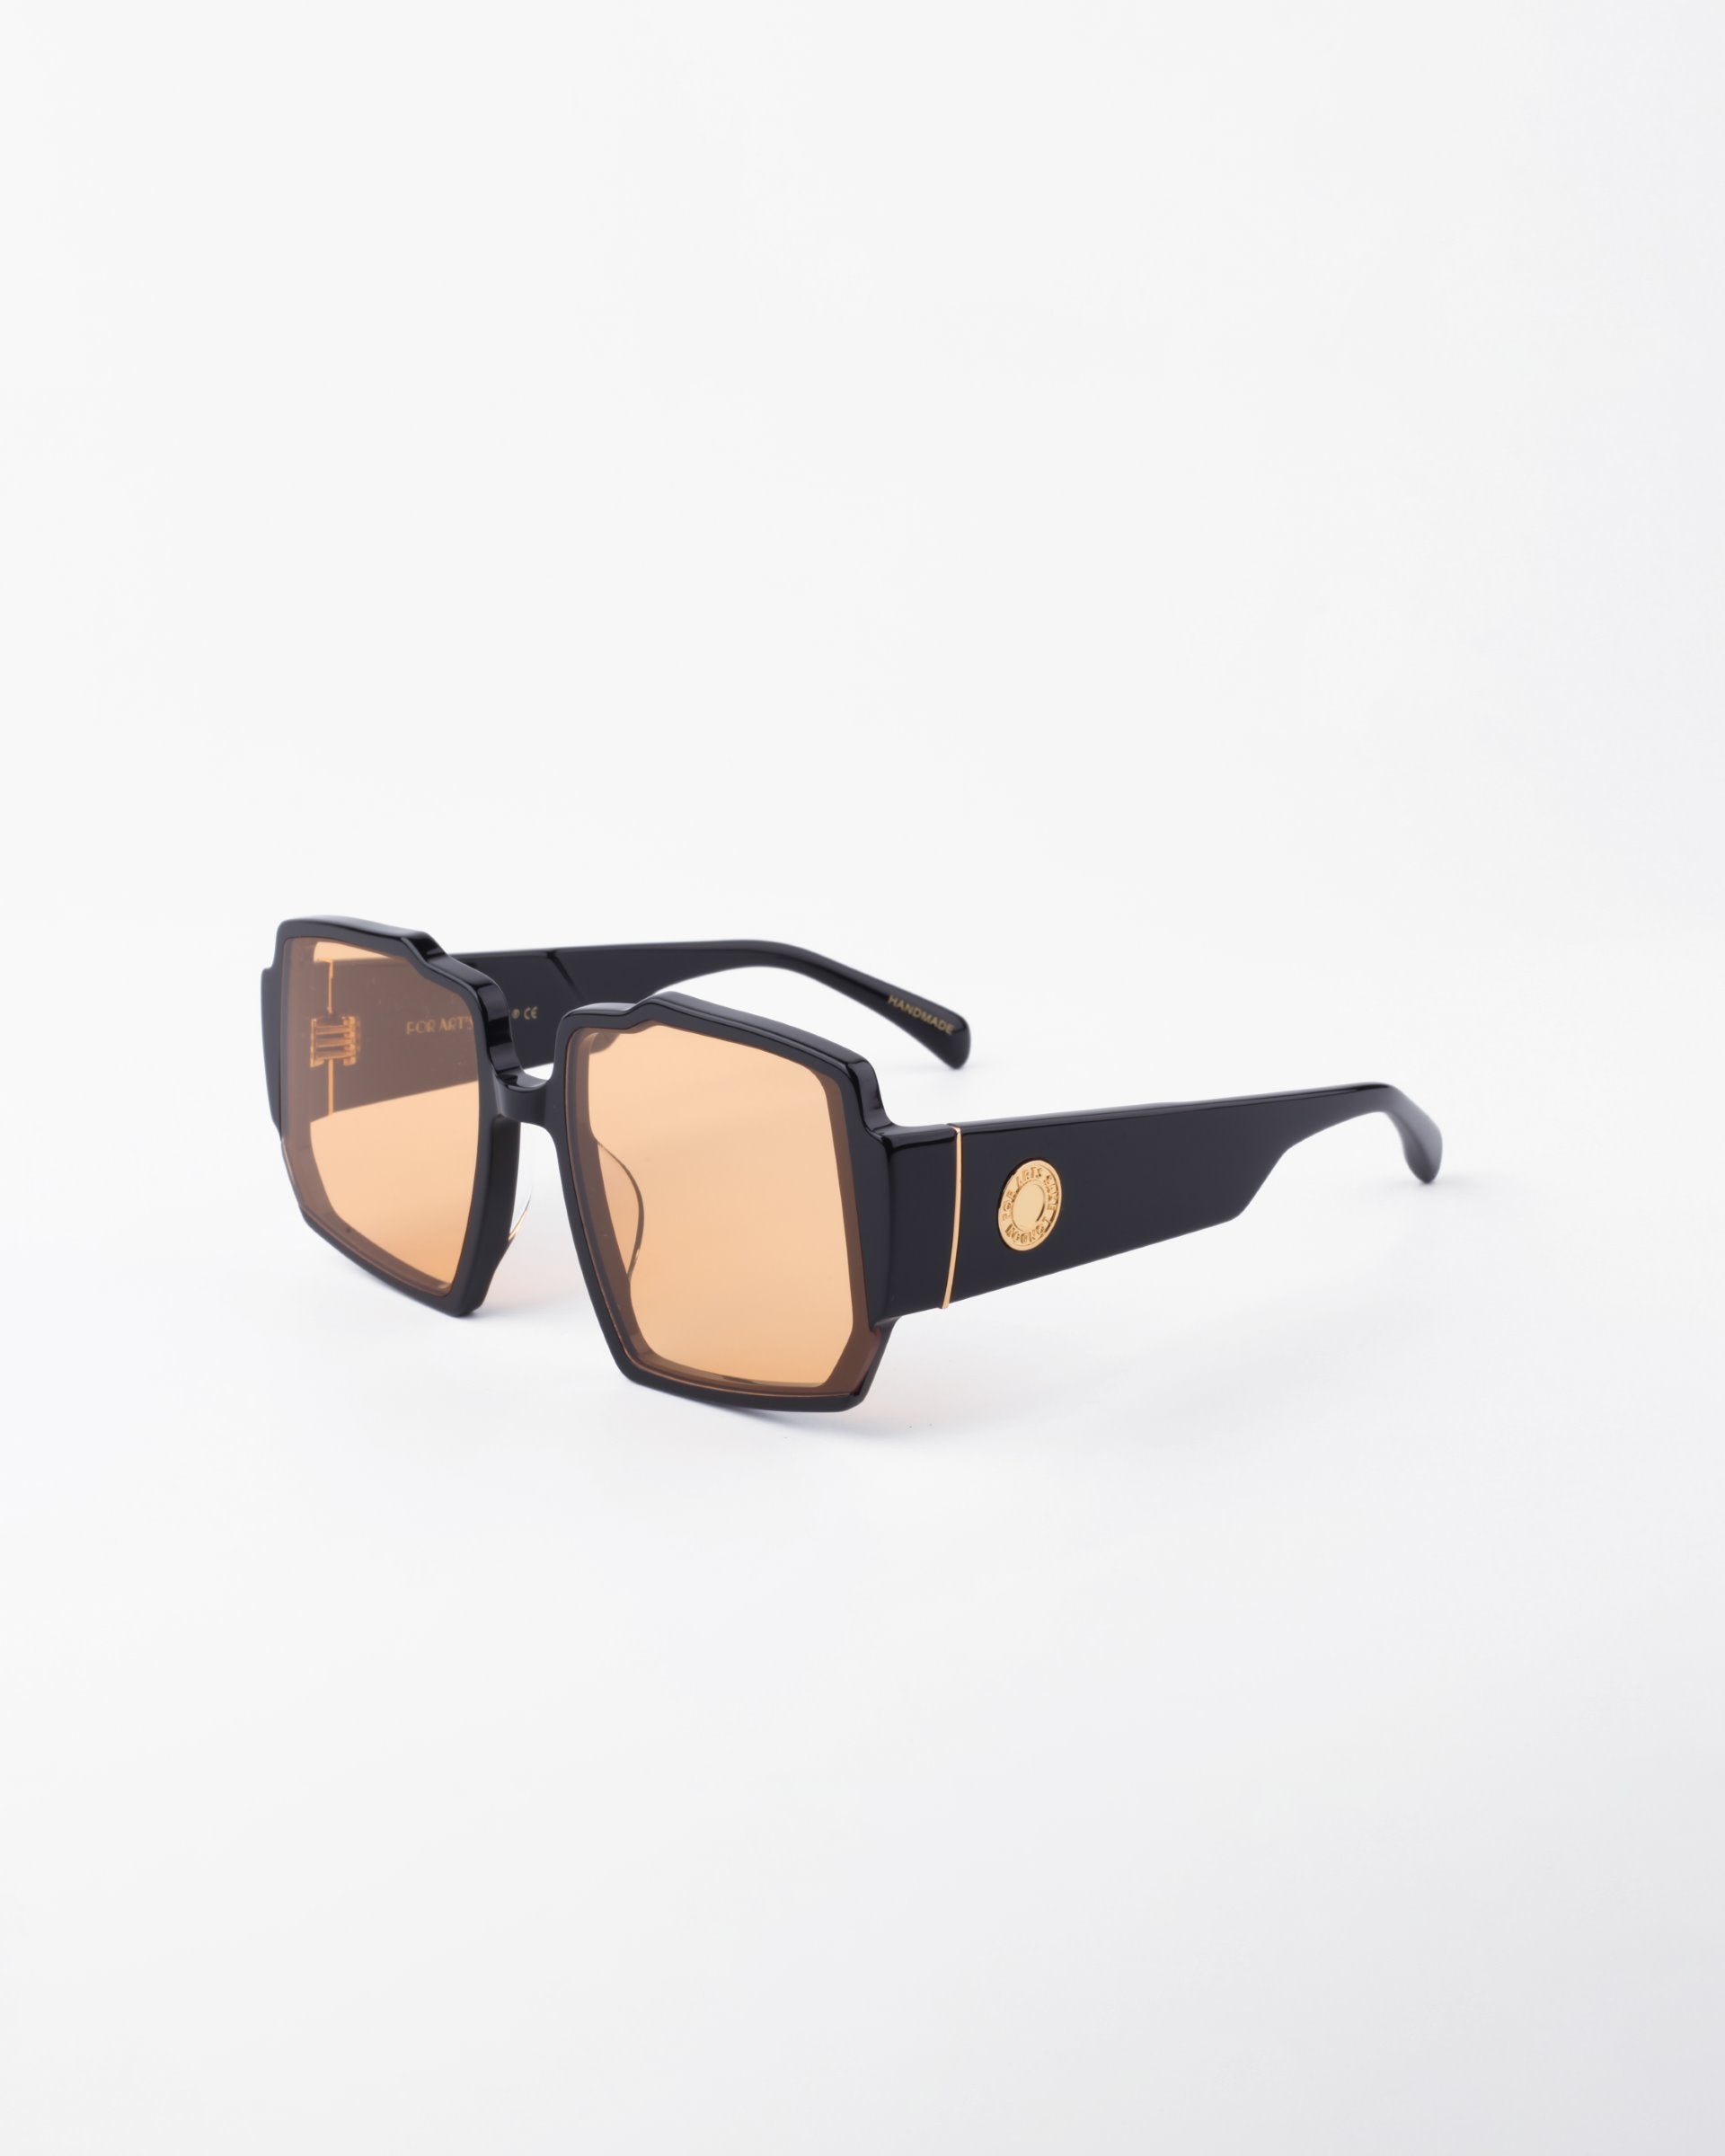 A pair of stylish black For Art&#39;s Sake® Moritz sunglasses with large, geometric, orange-tinted UV-protected lenses sits against a plain white background. The sunglasses feature a chunky acetate frame and thick arms adorned with a small, gold-colored emblem near the hinge.